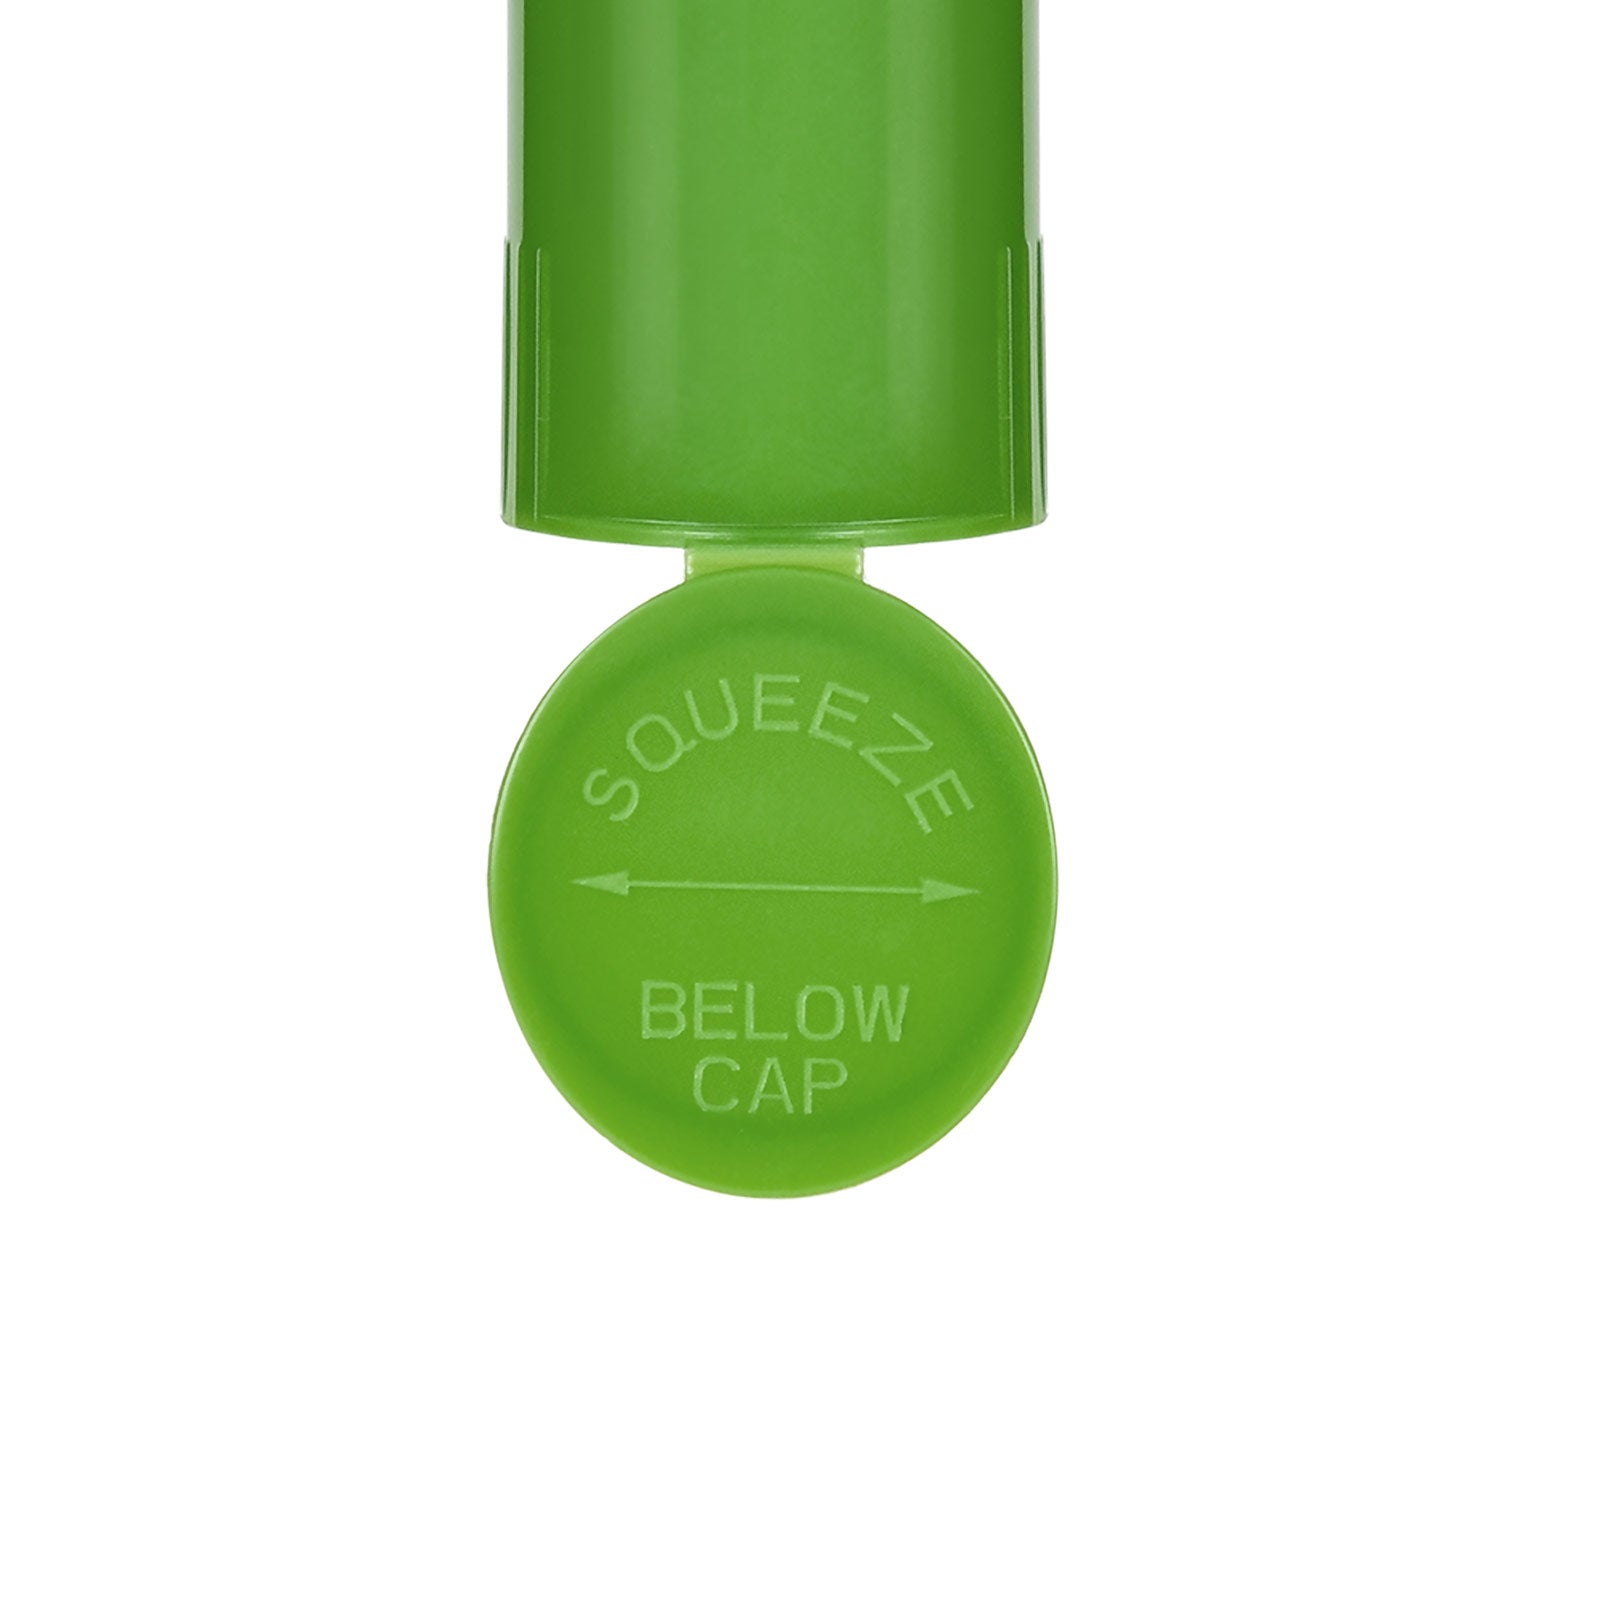 98mm Rx Squeeze Tubes Opaque Green - 1 Count